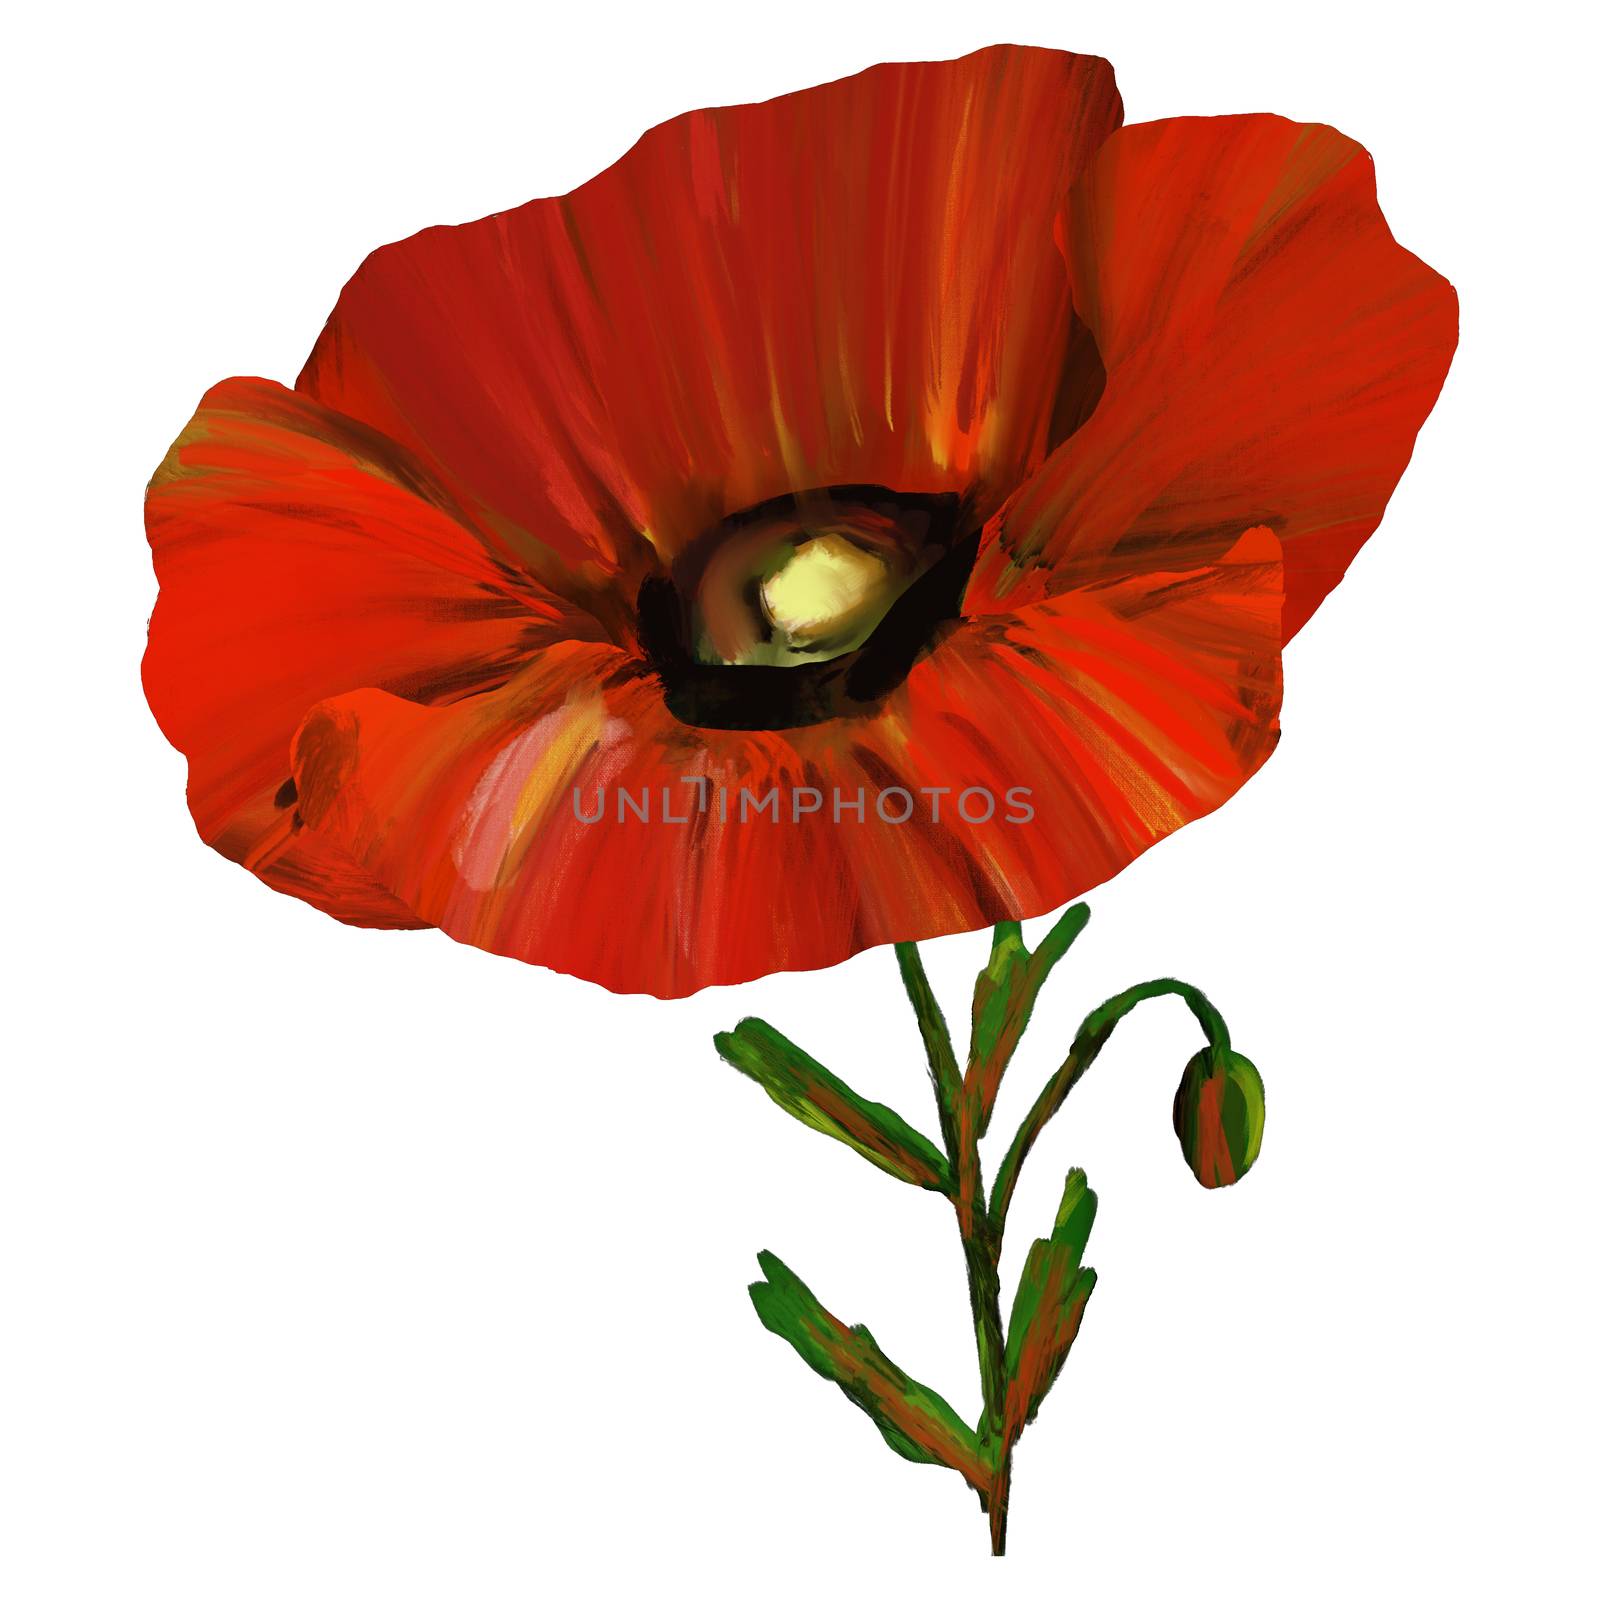 Single Red poppy flower with leaves and stem isolated on white background. Simple floral hand drawn wildflower design.